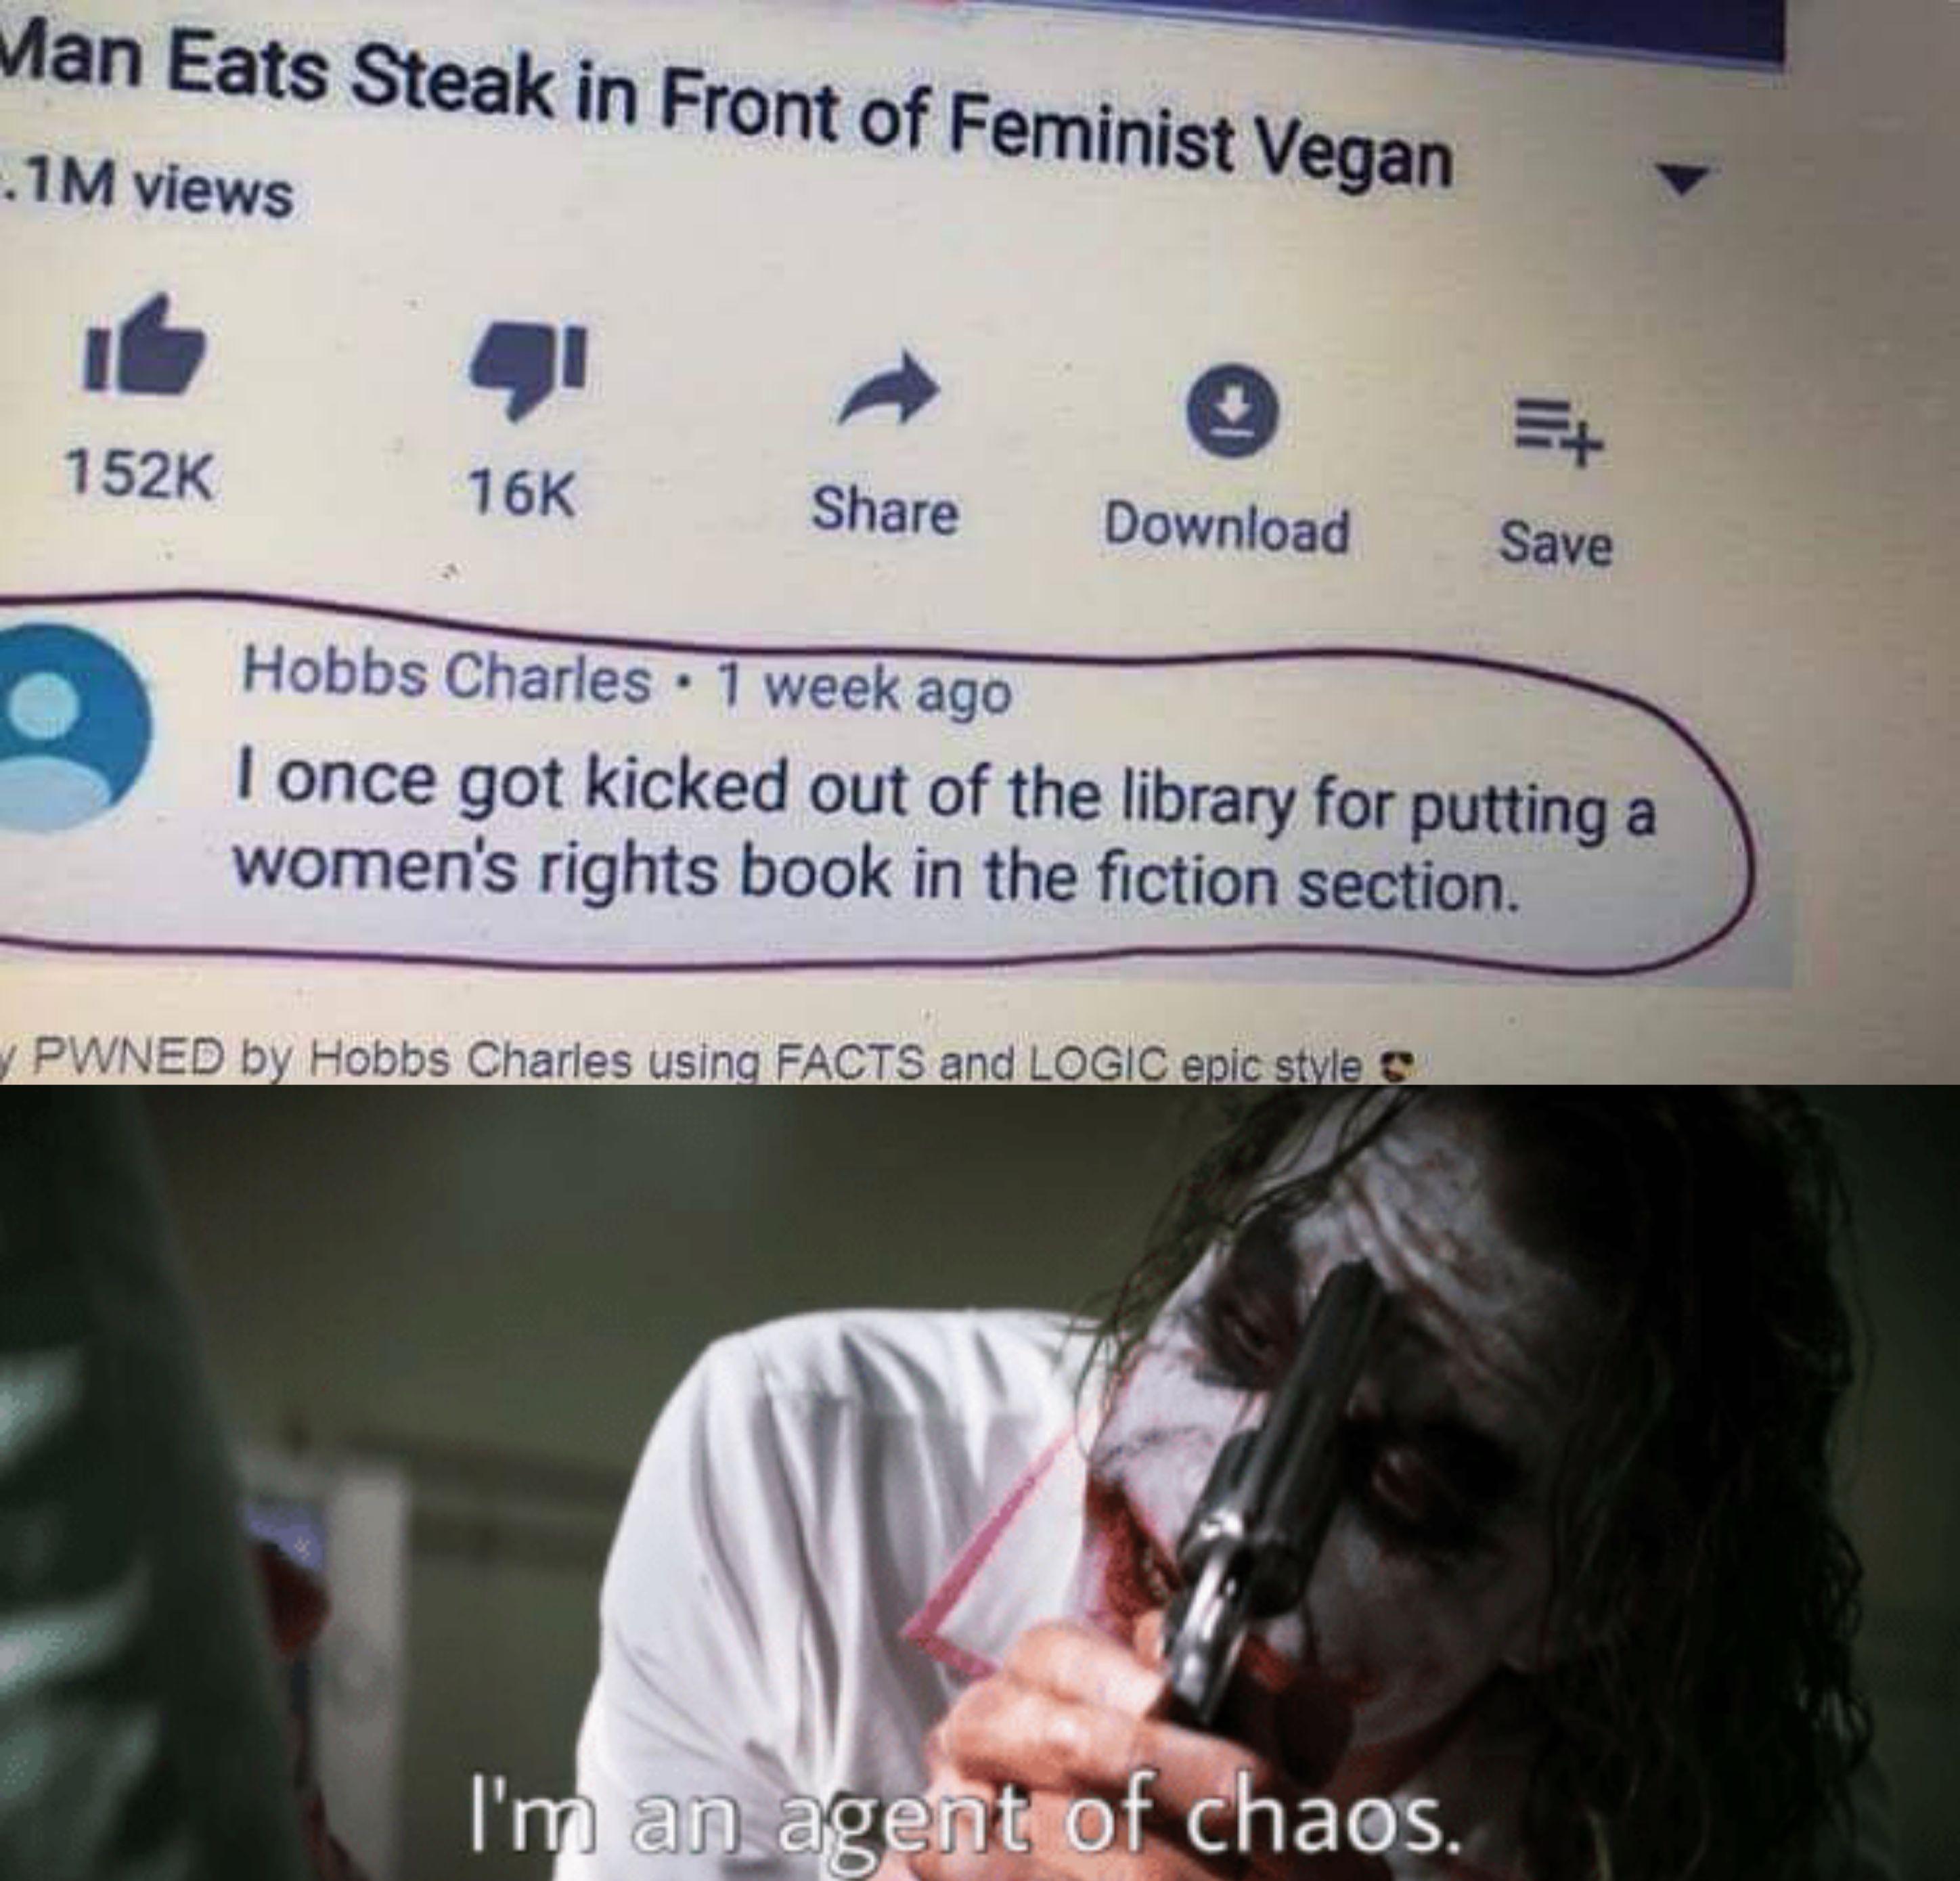 Man Eats Steak in Front of Feminist Vegan 1M views 16K Download Save Hobbs Charles . 1 week ago I once got kicked out of the library for putting a women's rights book in the fiction section. Pwned by Hobbs Charles using Facts and Logic epic styles I'm an…